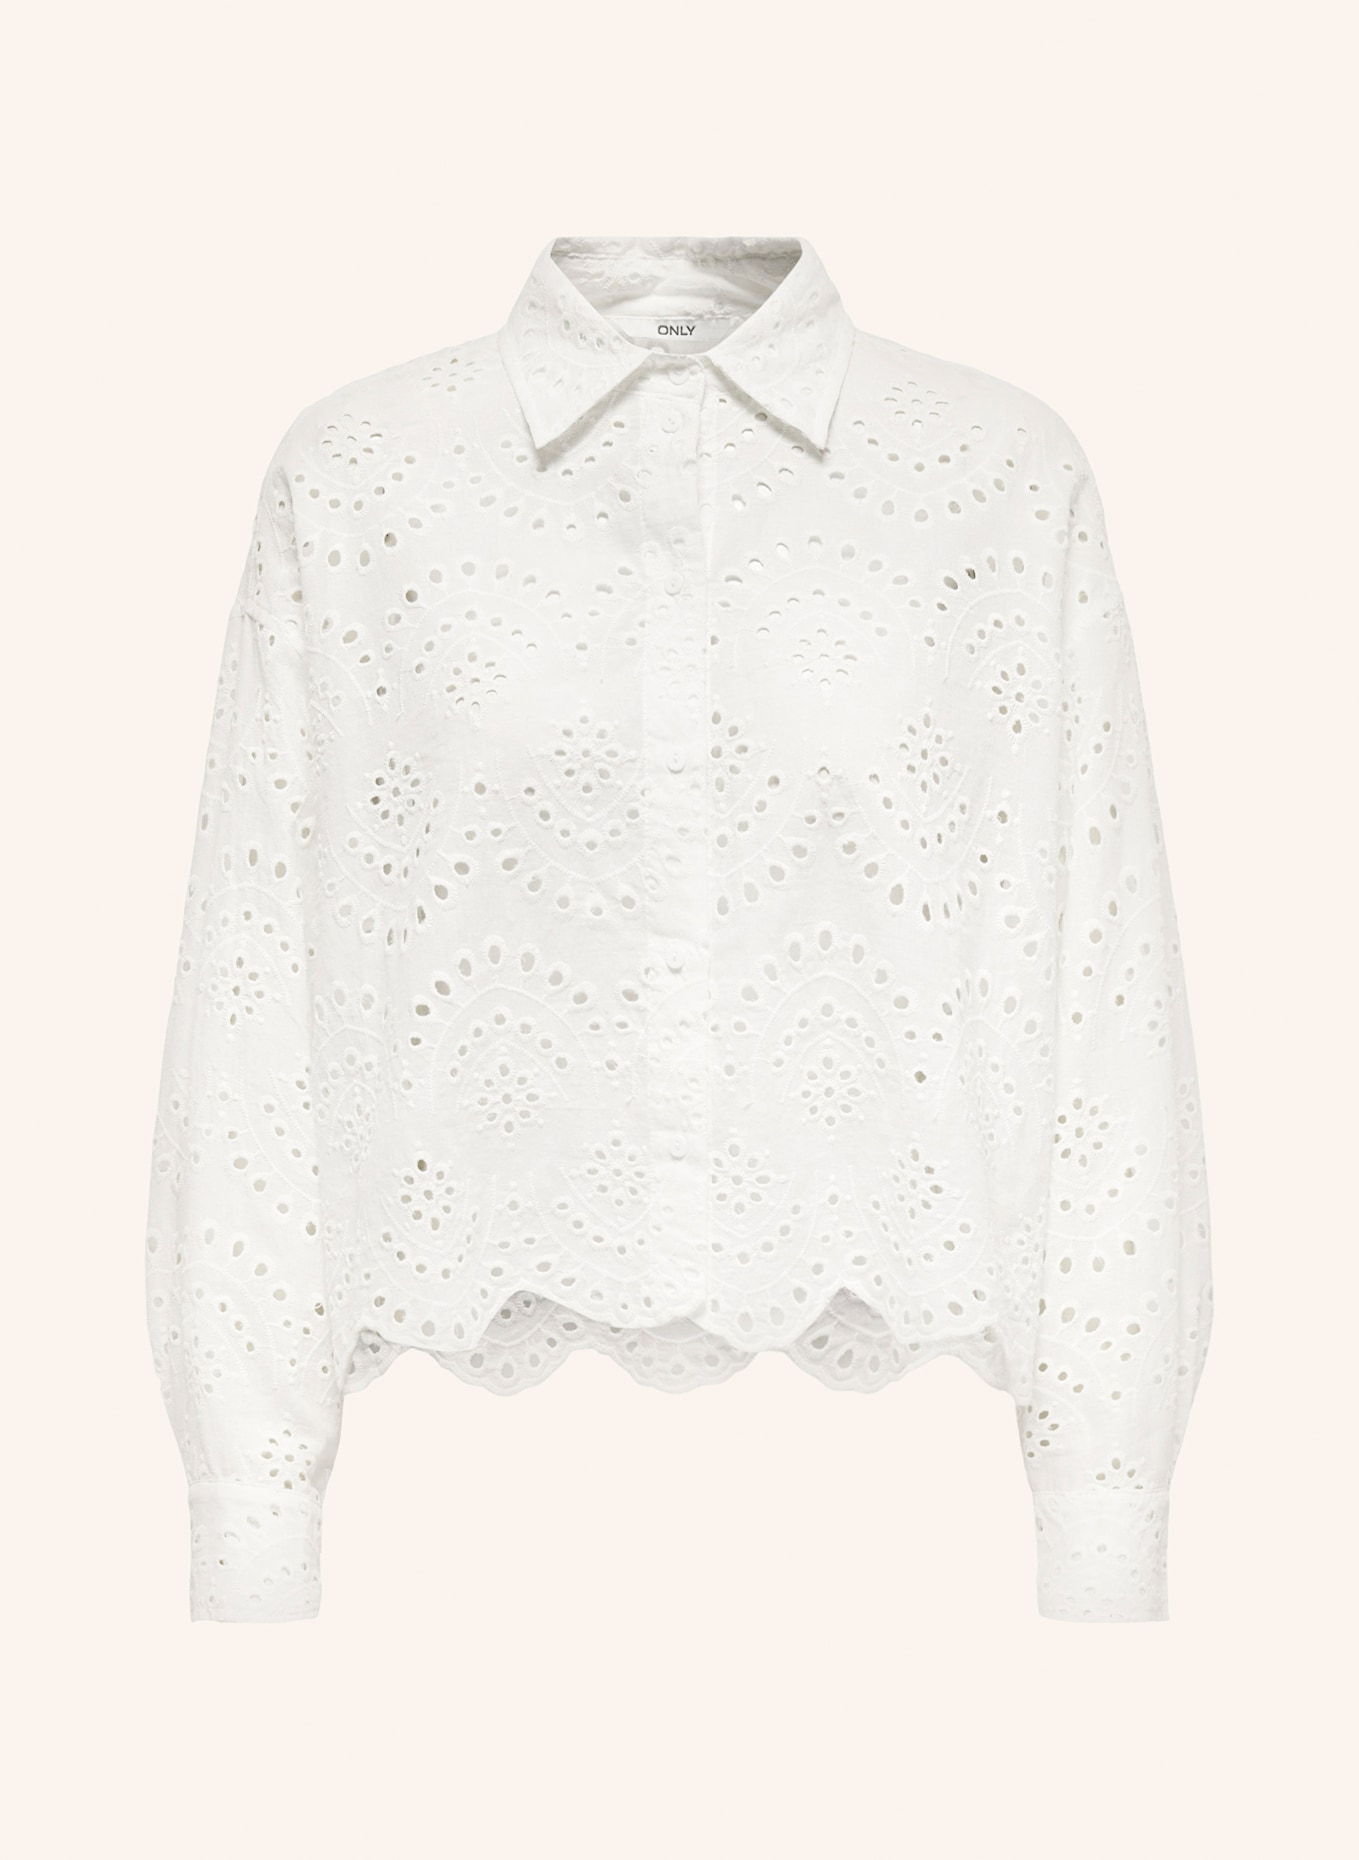 ONLY Shirt blouse with broderie anglaise, Color: ECRU (Image 1)